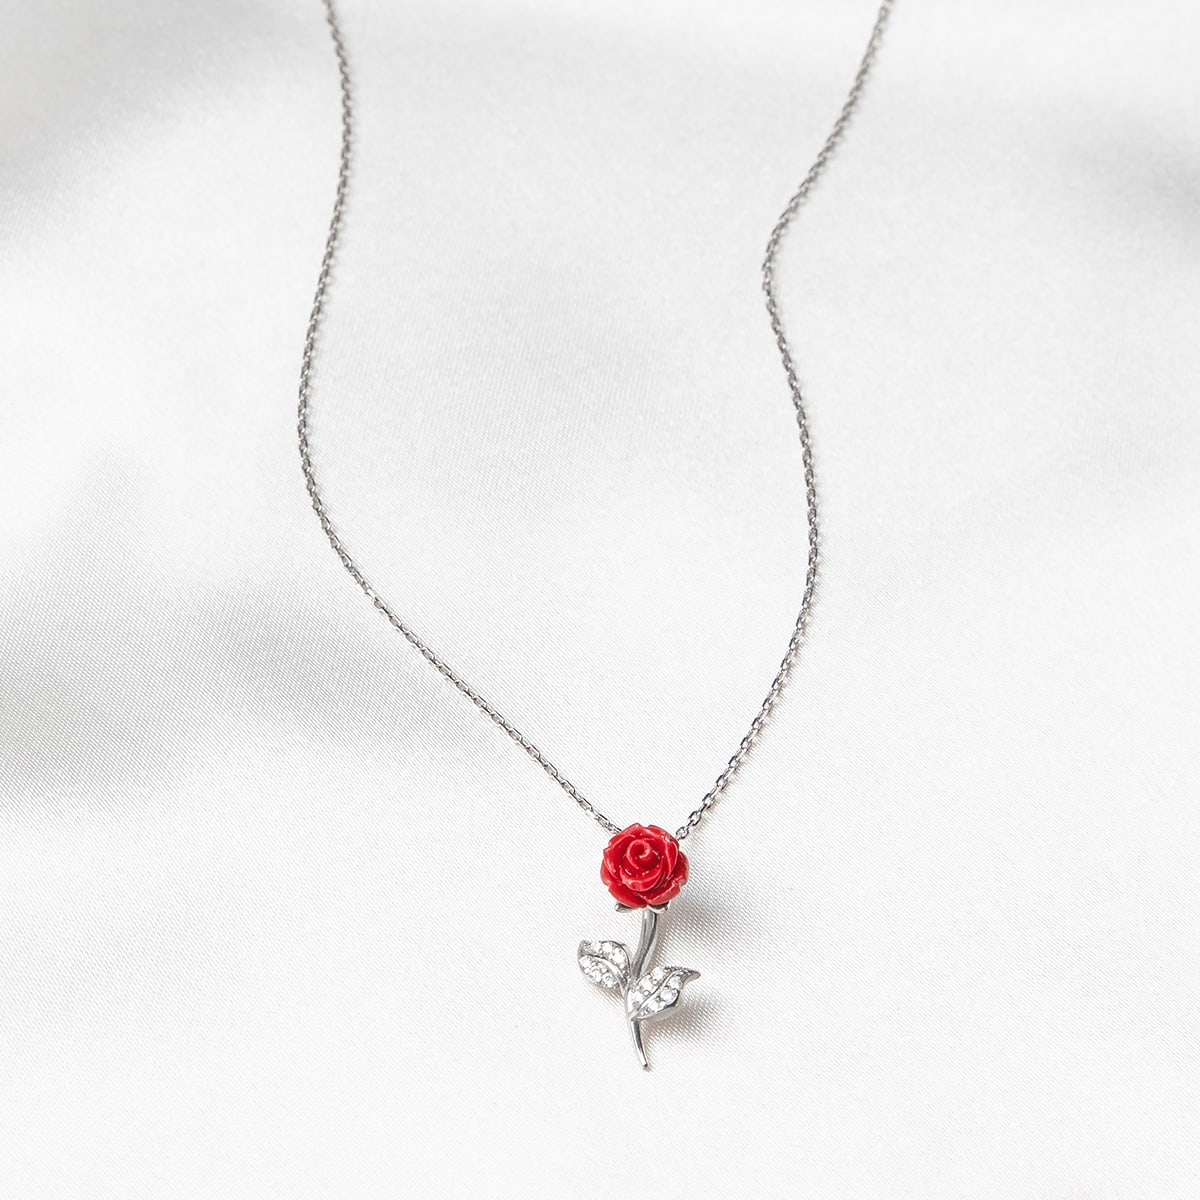 Dear Wife, I Love You (Happy Anniversary) - Red Rose Necklace Gift Set